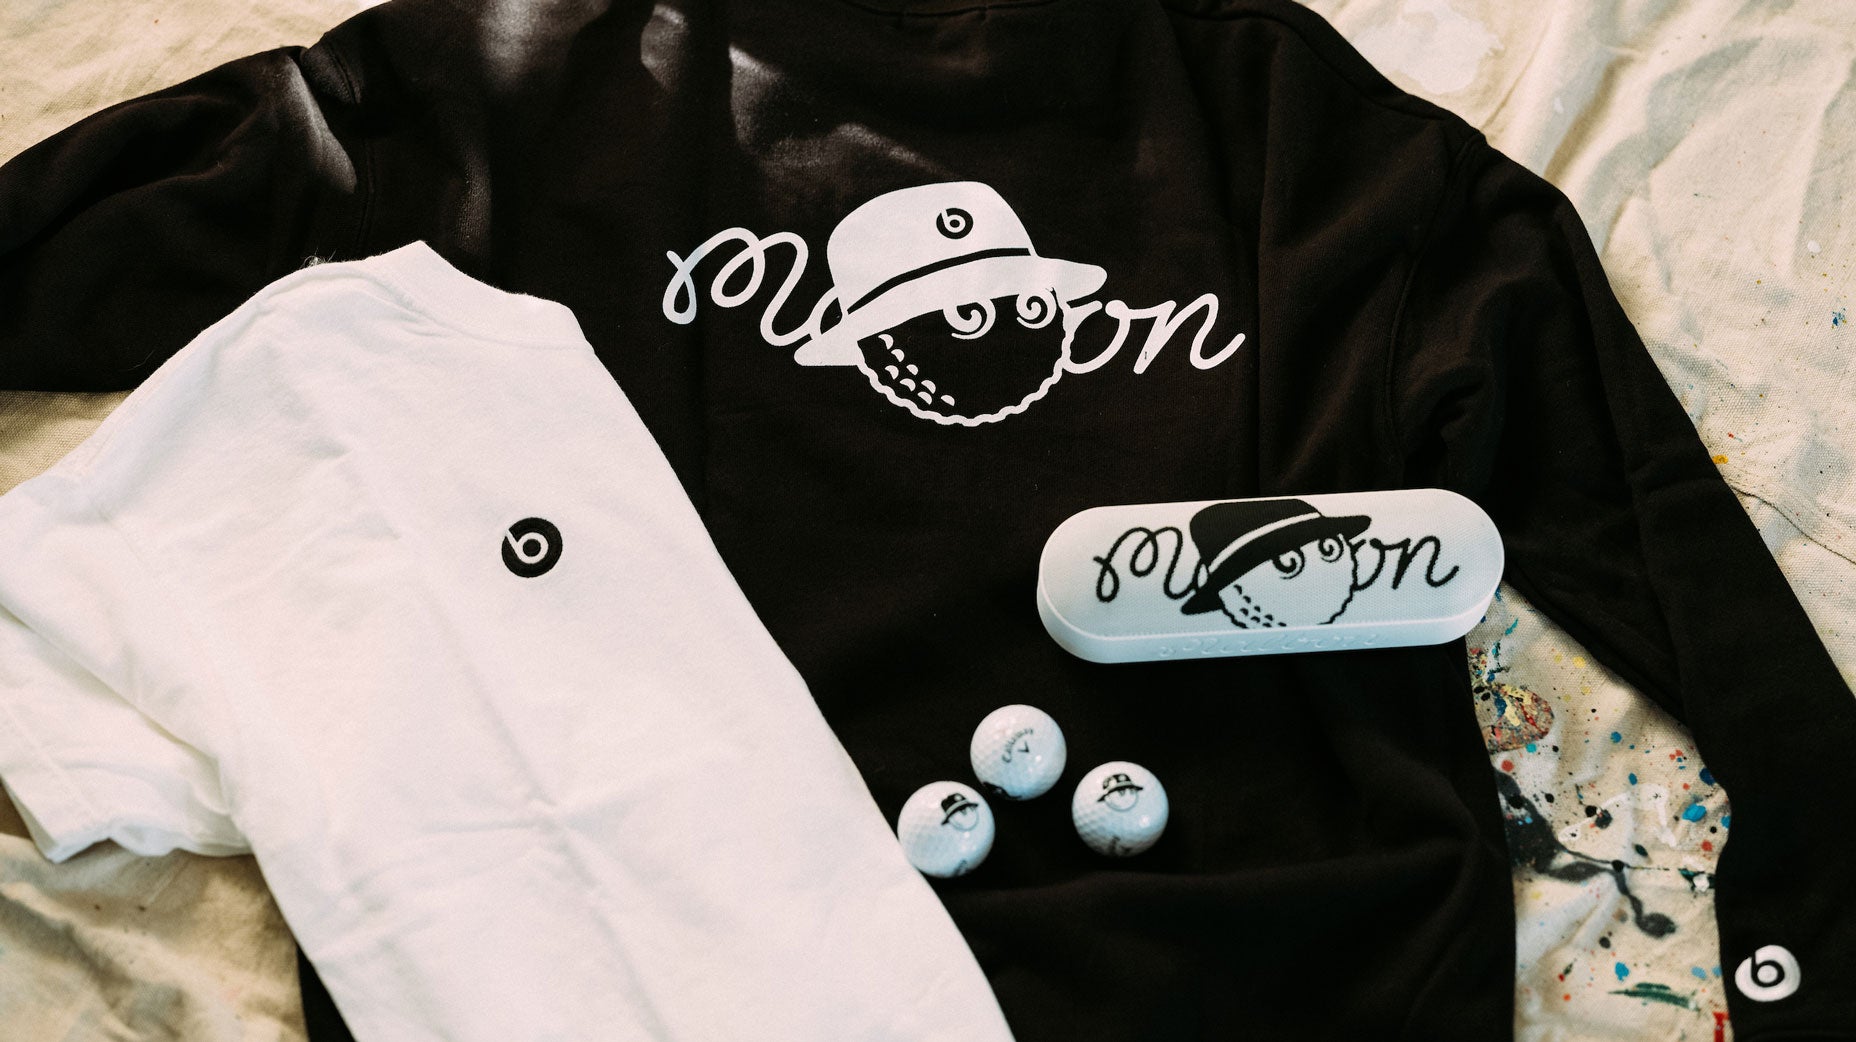 Limited-edition Malbon x Beats capsule collection is here